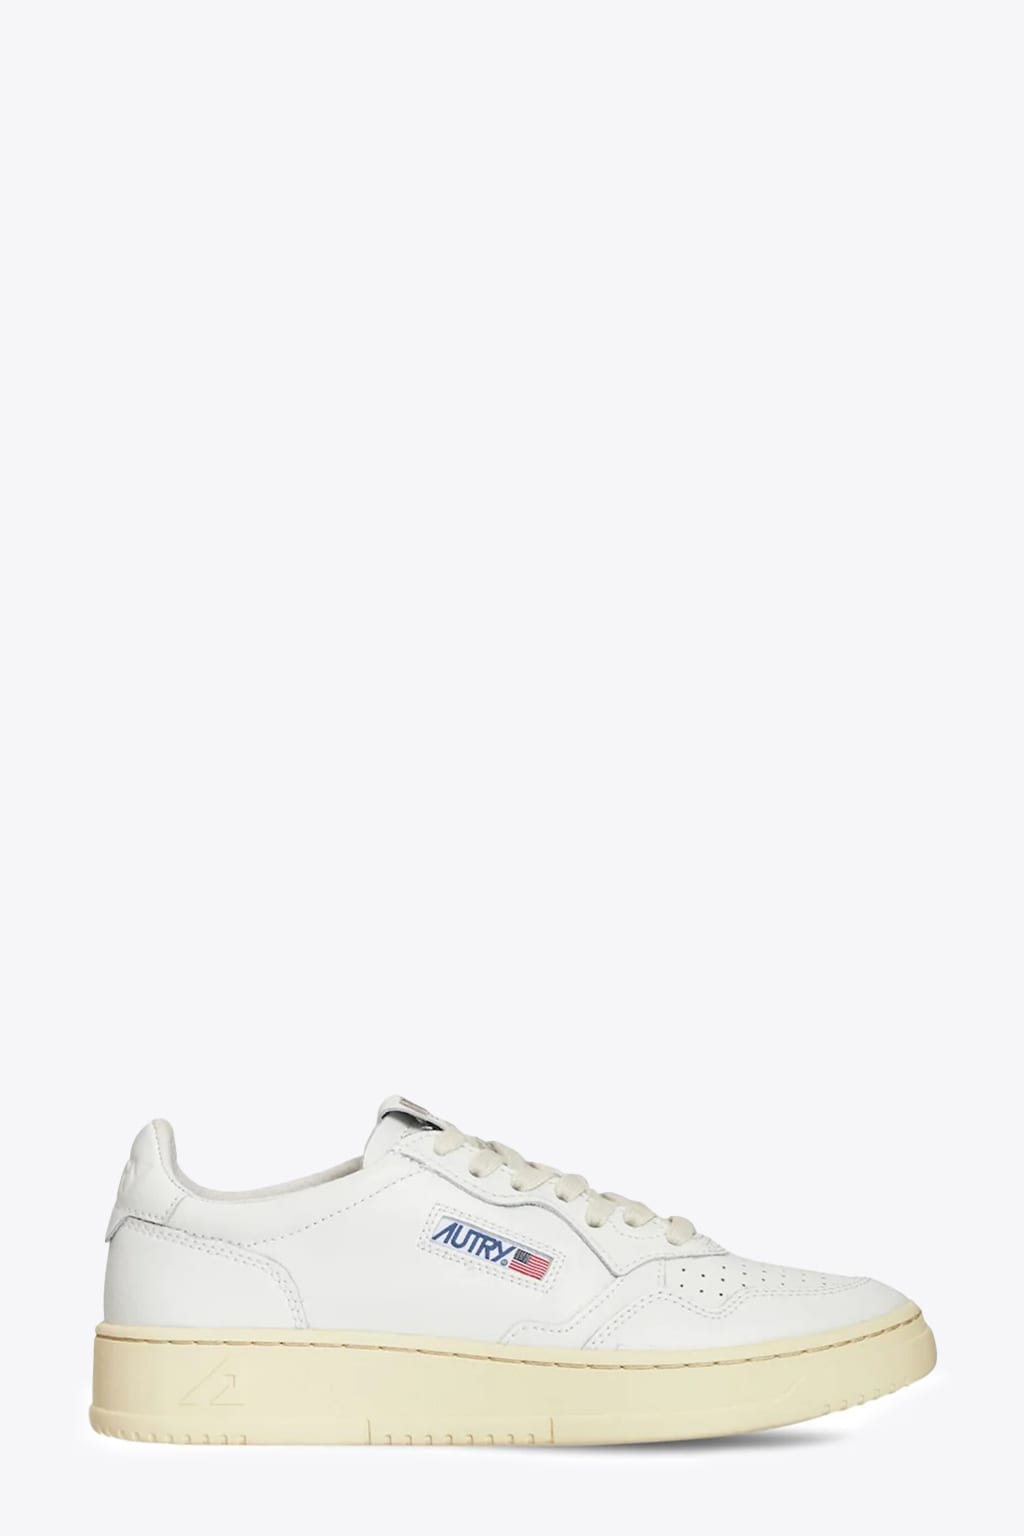 Autry 01 Low Wom Leat/leat White leather low top lace up sneakers - Medalist